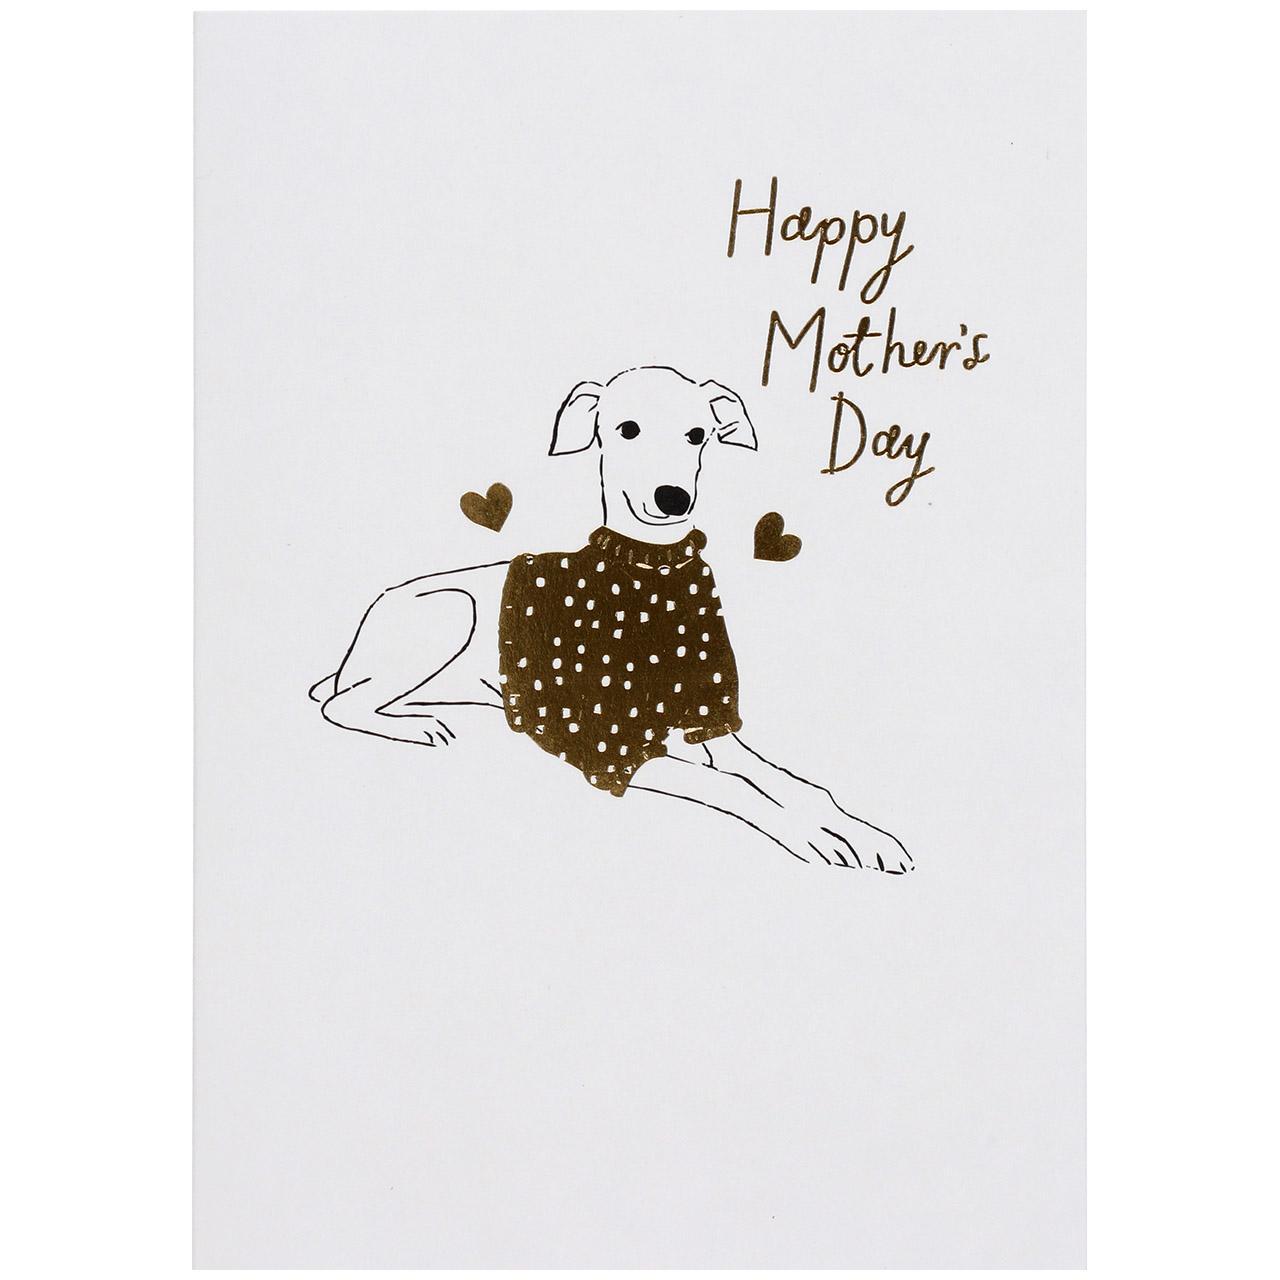 M&S Dog Happy Mother's Day Card